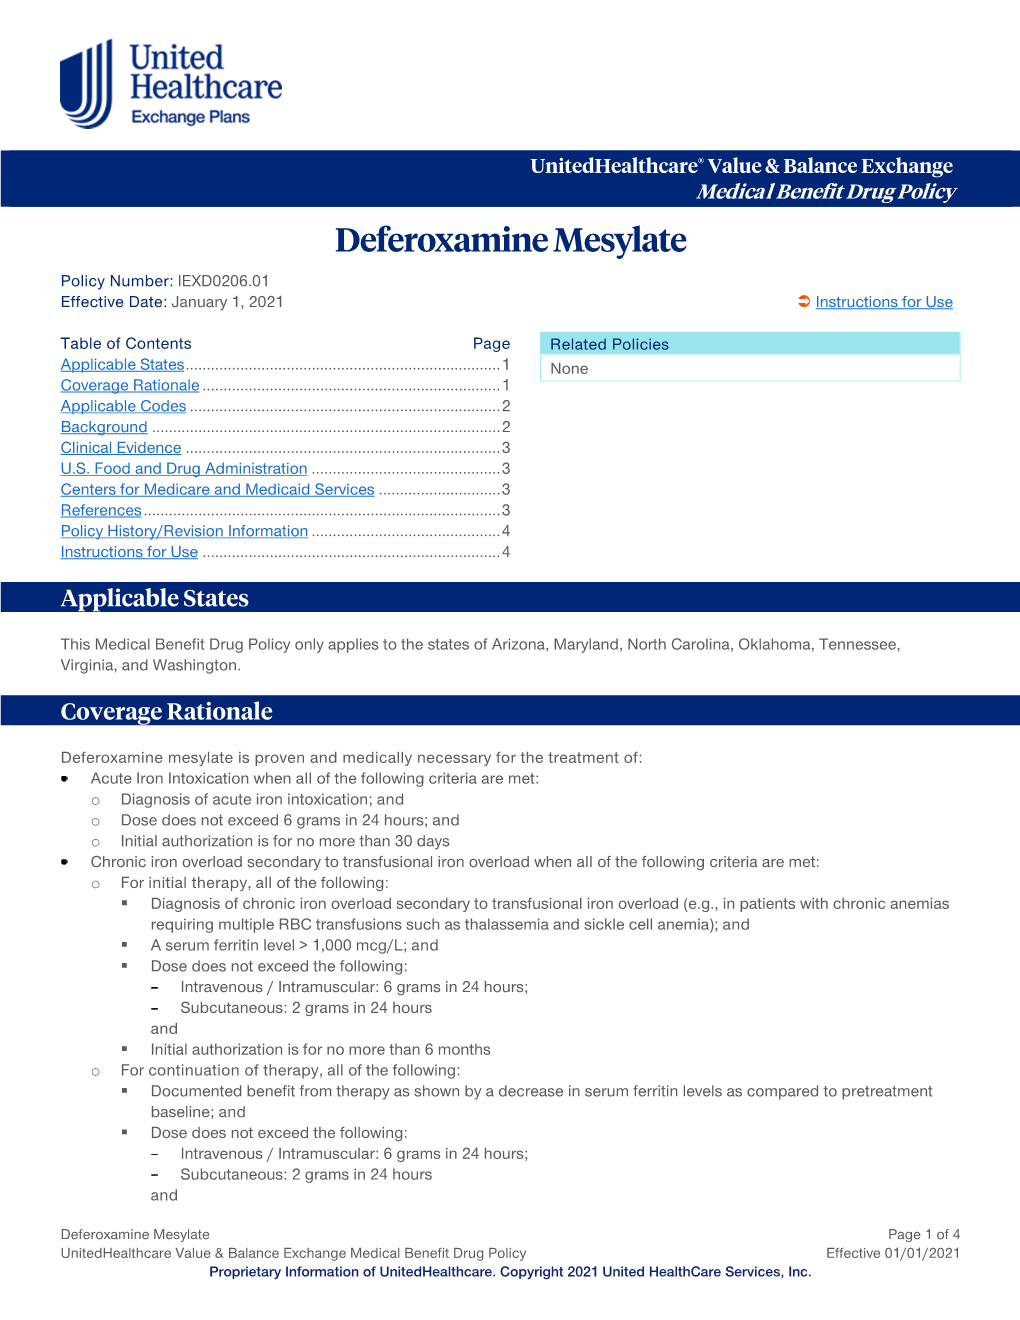 Deferoxamine Mesylate Policy Number: IEXD0206.01 Effective Date: January 1, 2021  Instructions for Use